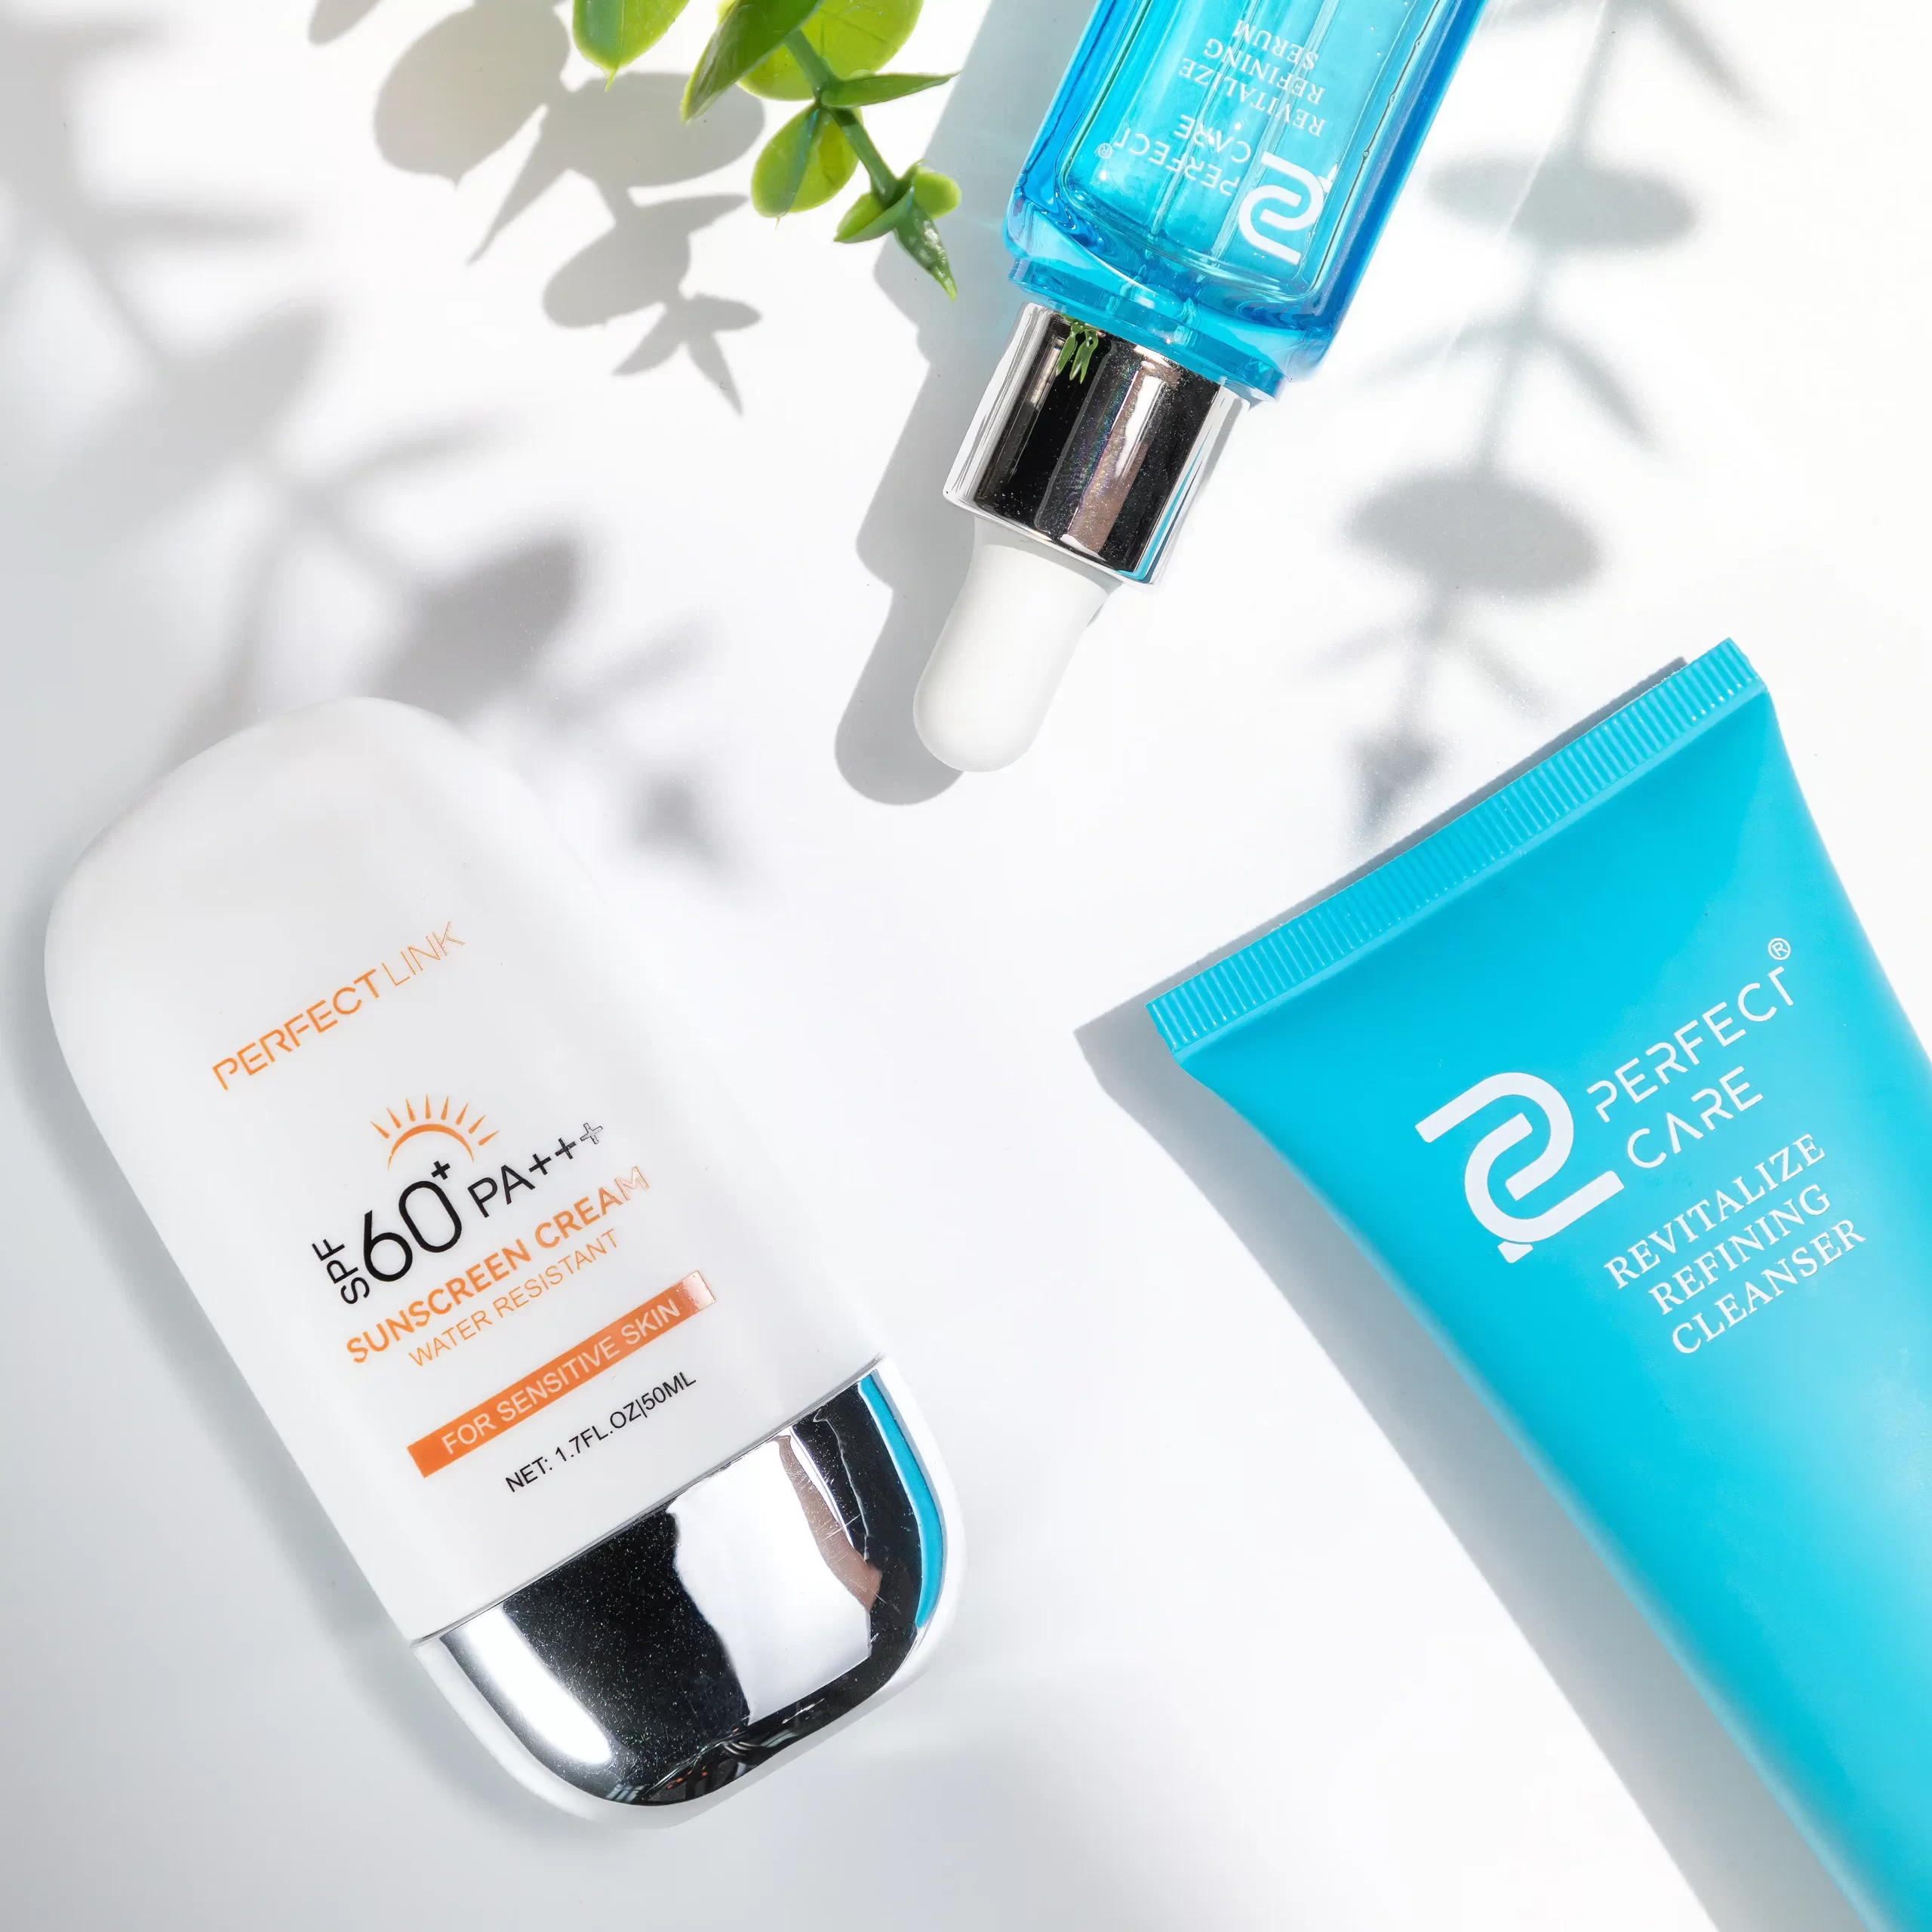 The Ultimate Portable SPF 60+ Sunscreen for Sensitive Skin: Protect and Love Your Skin